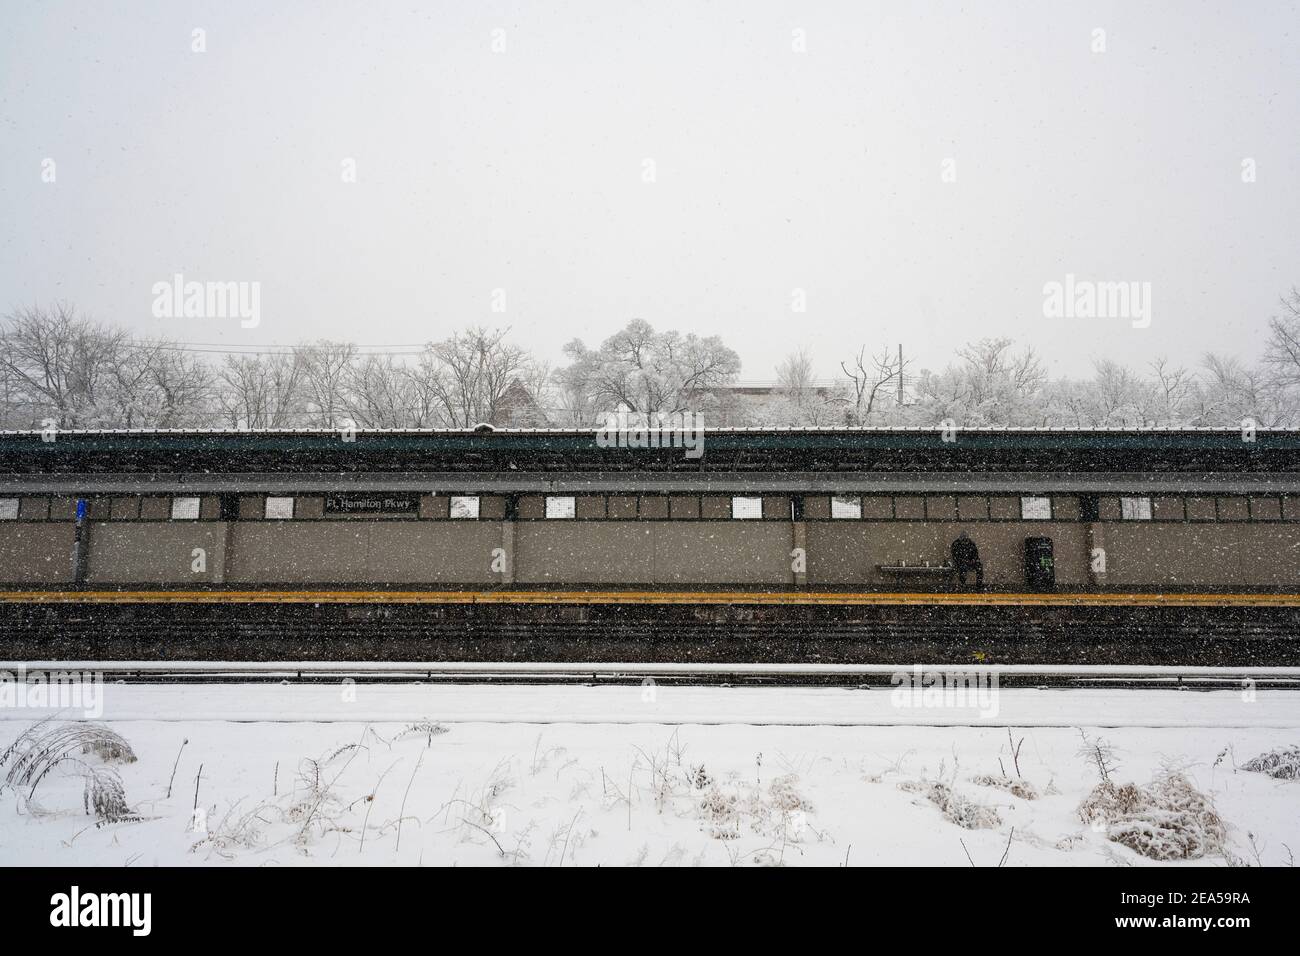 Brooklyn, New York, USA. 07 February 2021, Brooklyn, New York, USA Solitary figure waits for a subway train as New York City experiences second major winter storm in seven days Credit: Joseph Reid/Alamy Live News Stock Photo